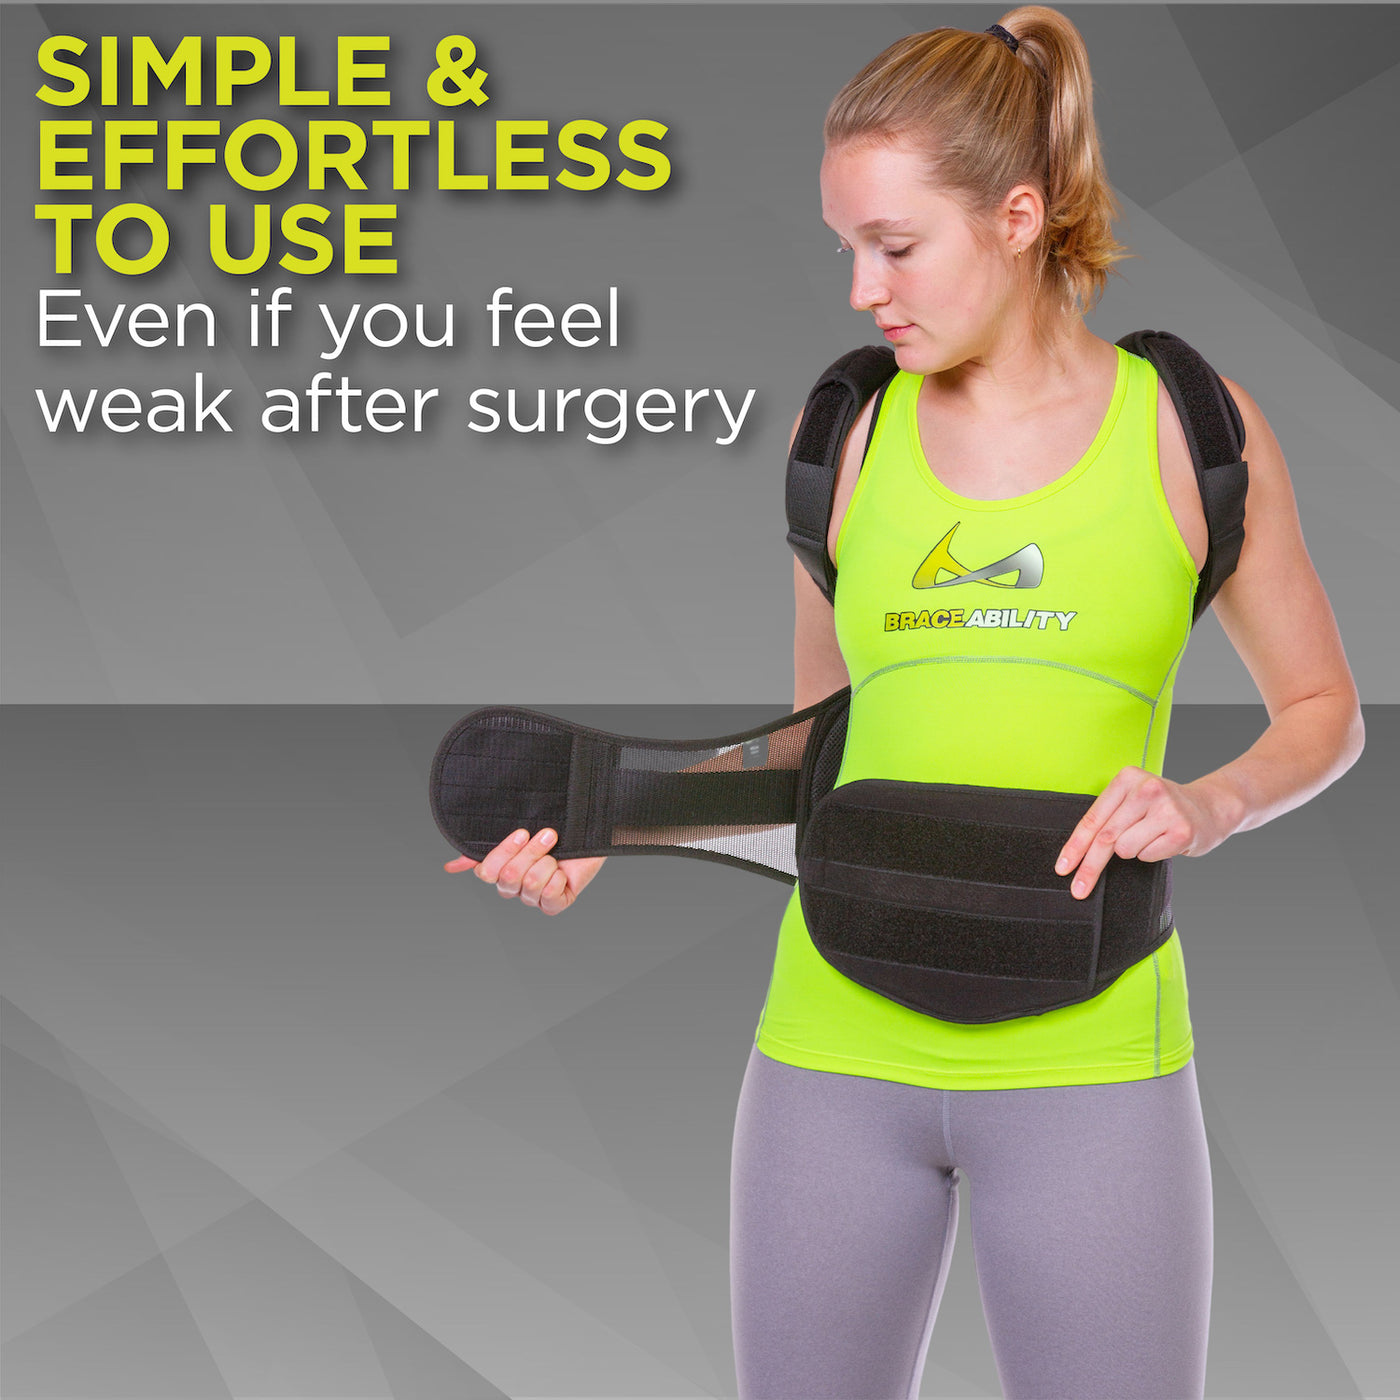 With wrap-around straps the full back postural extension brace is simple and effortless to use